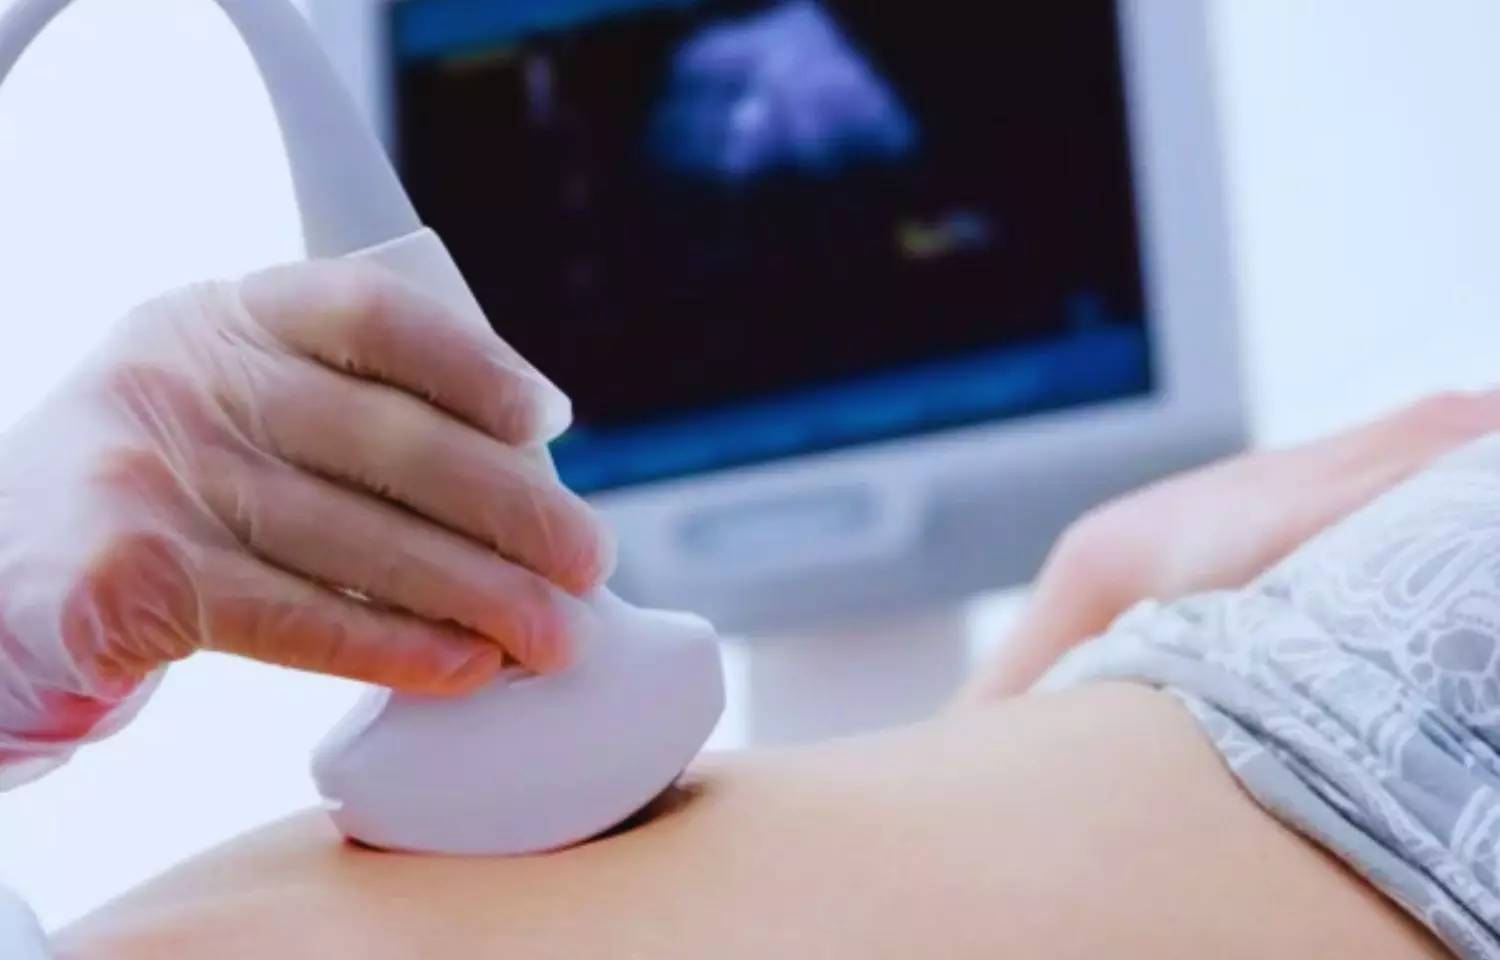 AI may help diagnose cystic hygroma in fetal ultrasound images, finds study